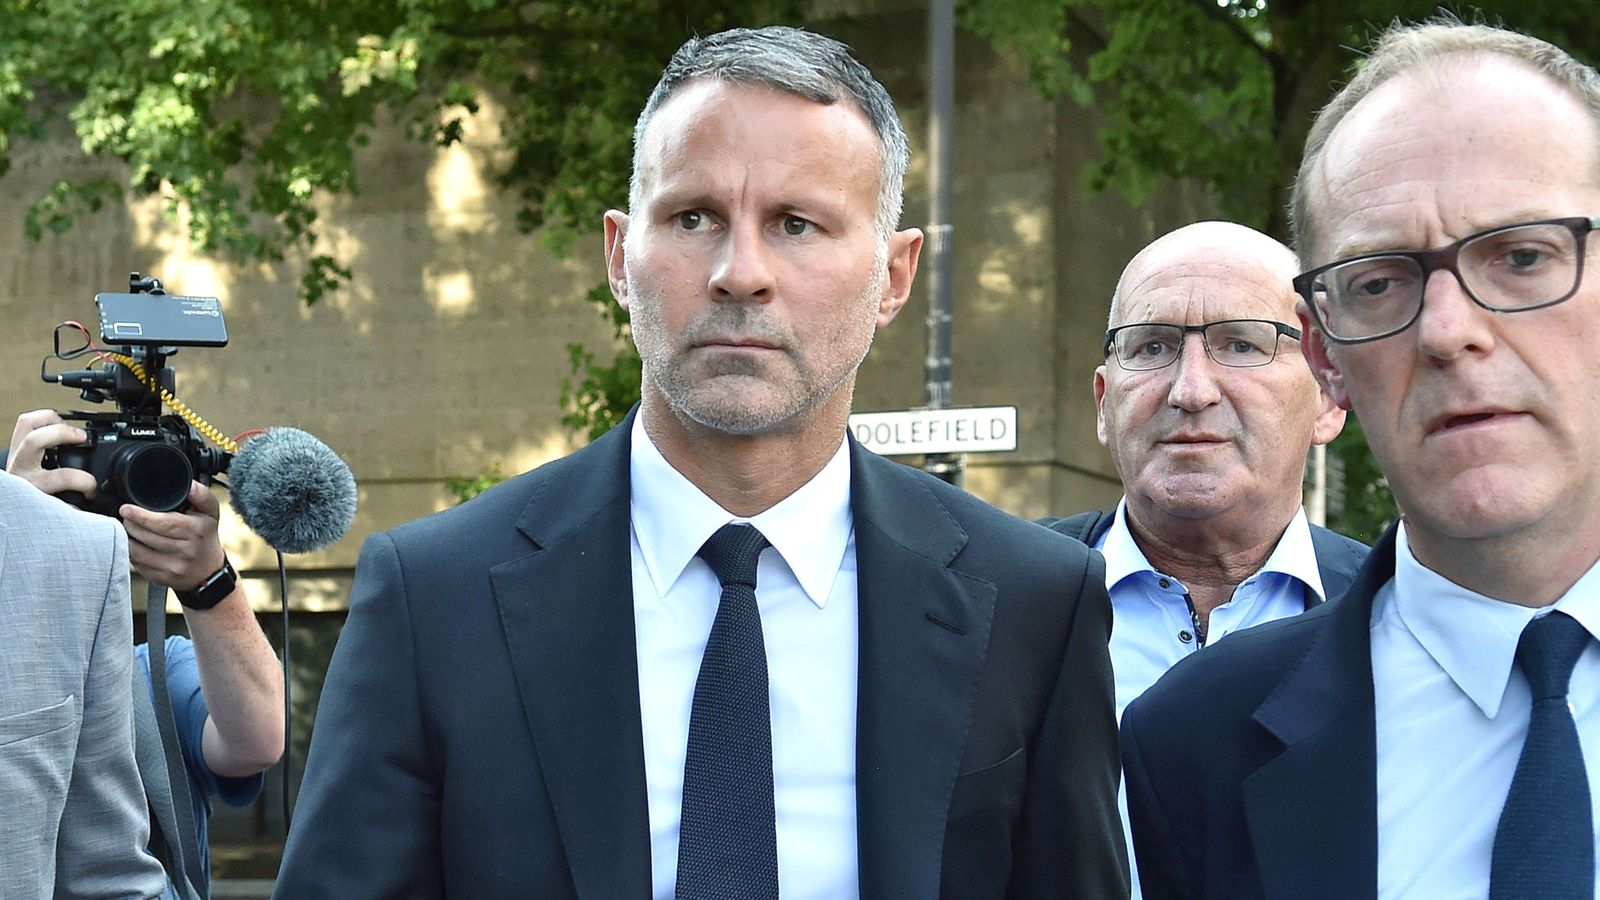 Giggs denies using “emotional blackmail” in assault trial